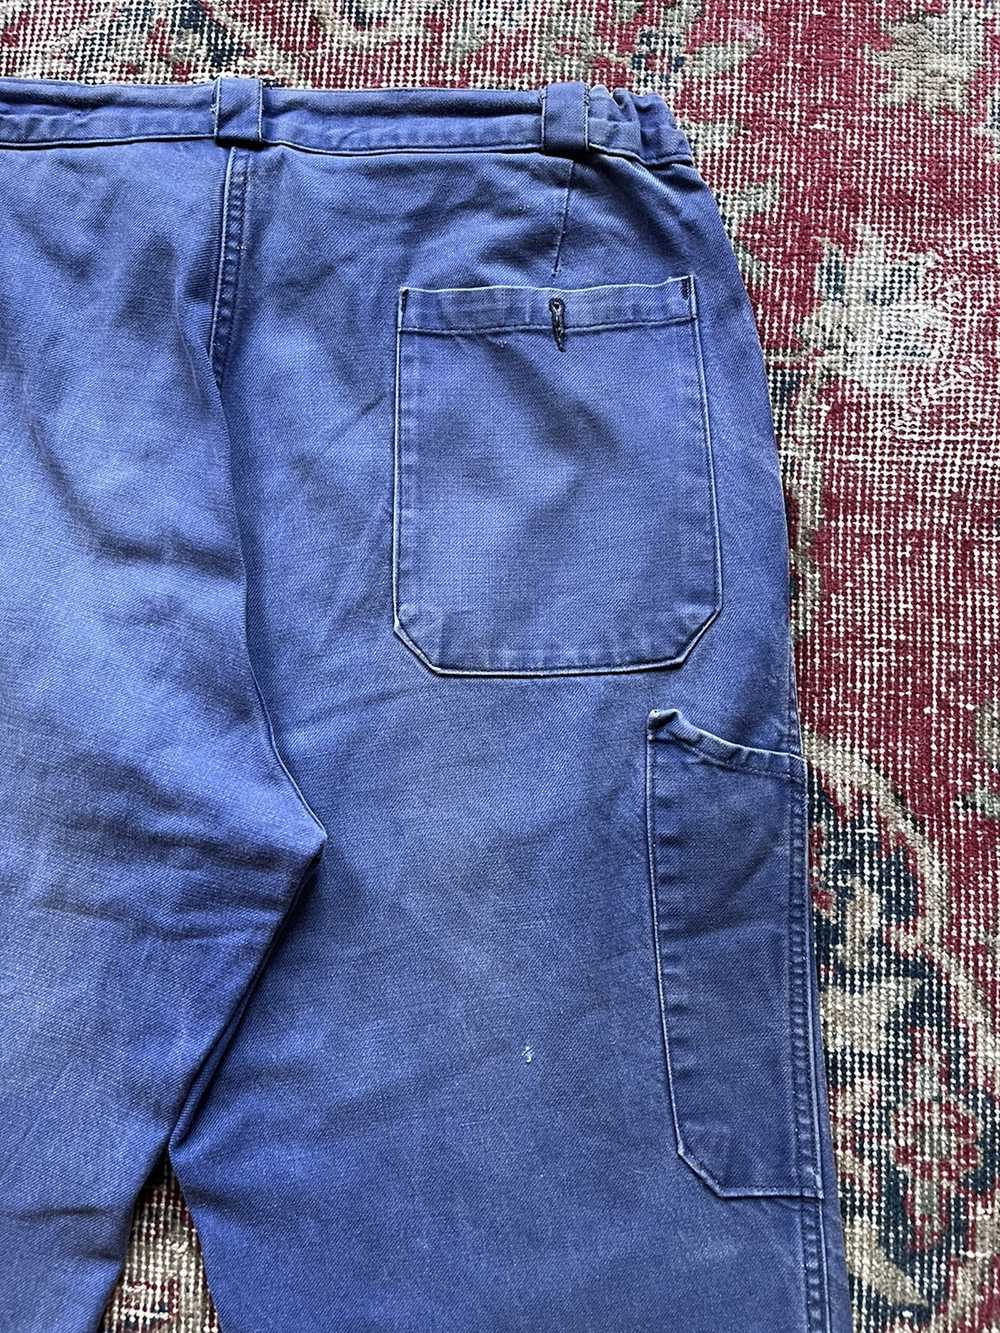 Vintage Vintage French Workwear Pants 60s faded - image 5